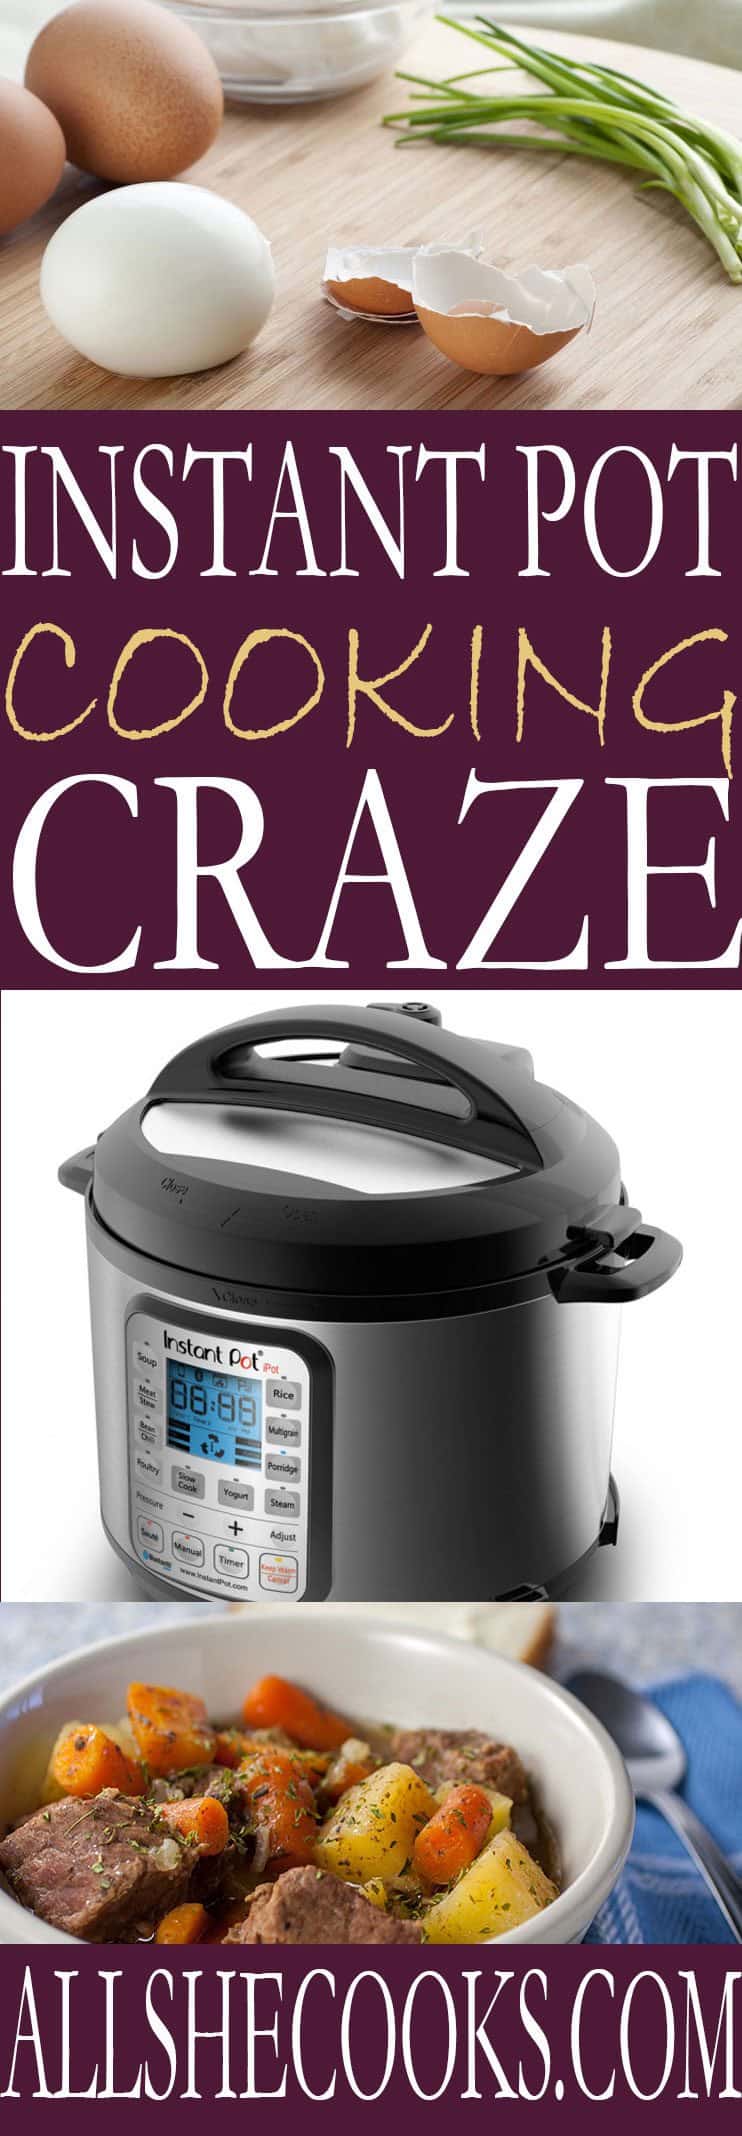 Join the Instant Pot Cooking craze and learn how to make fast and easy meals at home that are healthier and more nutrient rich, all with the Instant Pot. You will love all these instant pot recipes.